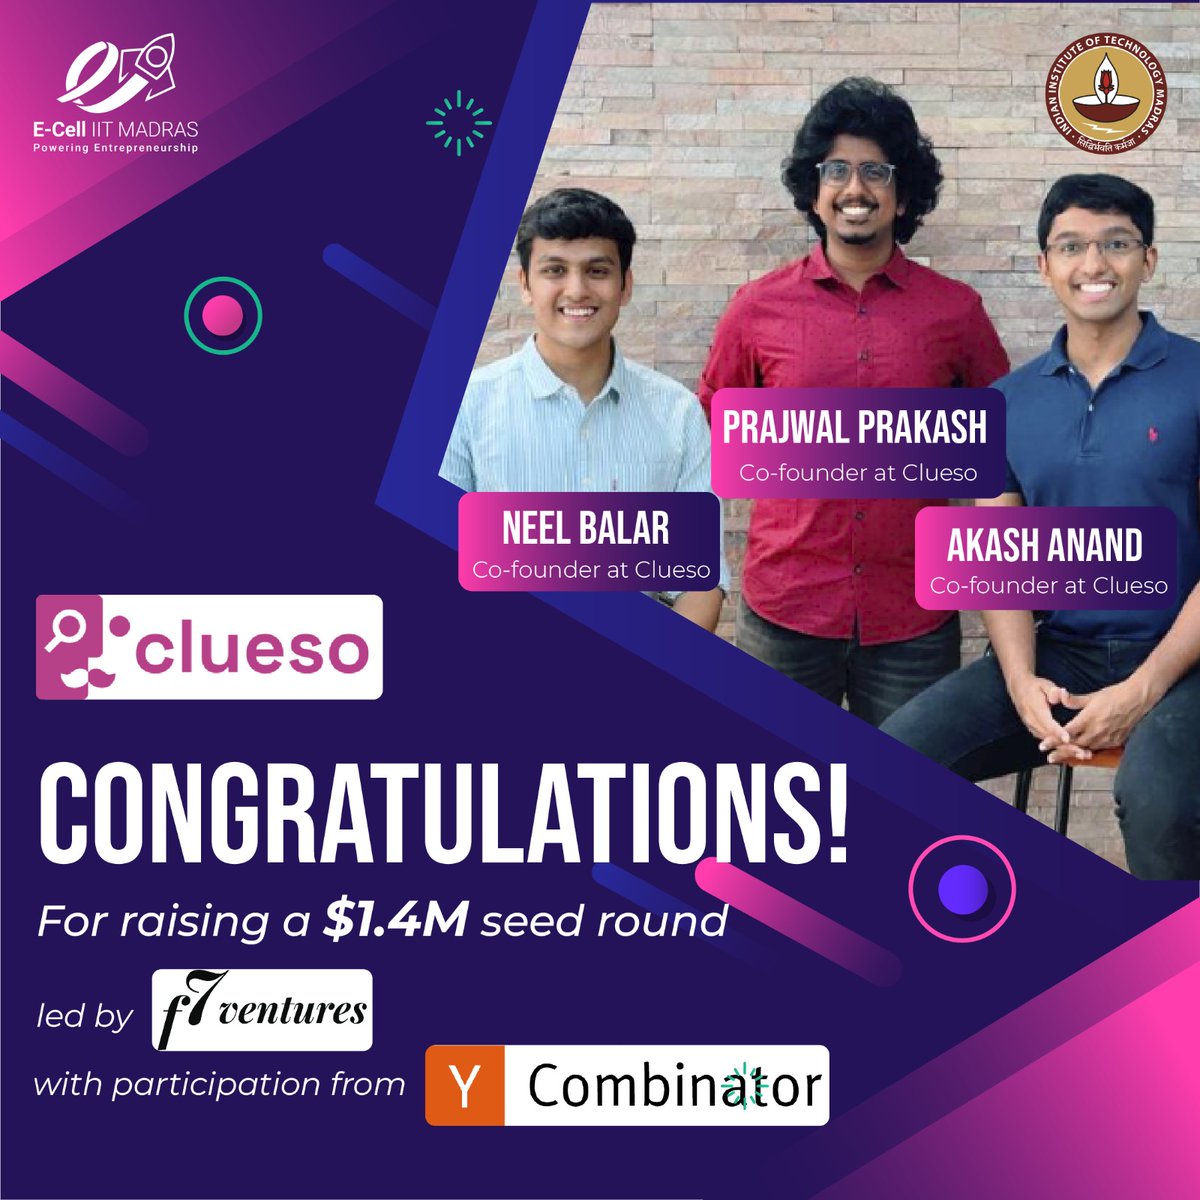 @iitmadras alumni founders at @goClueso have secured a $1.4M seed round led by f7 Ventures, with continued support from @ycombinator. Their AI-powered platform is transforming corporate training and product demos, while enhancing efficiency. #IITMadras #Clueso #StartupSucces